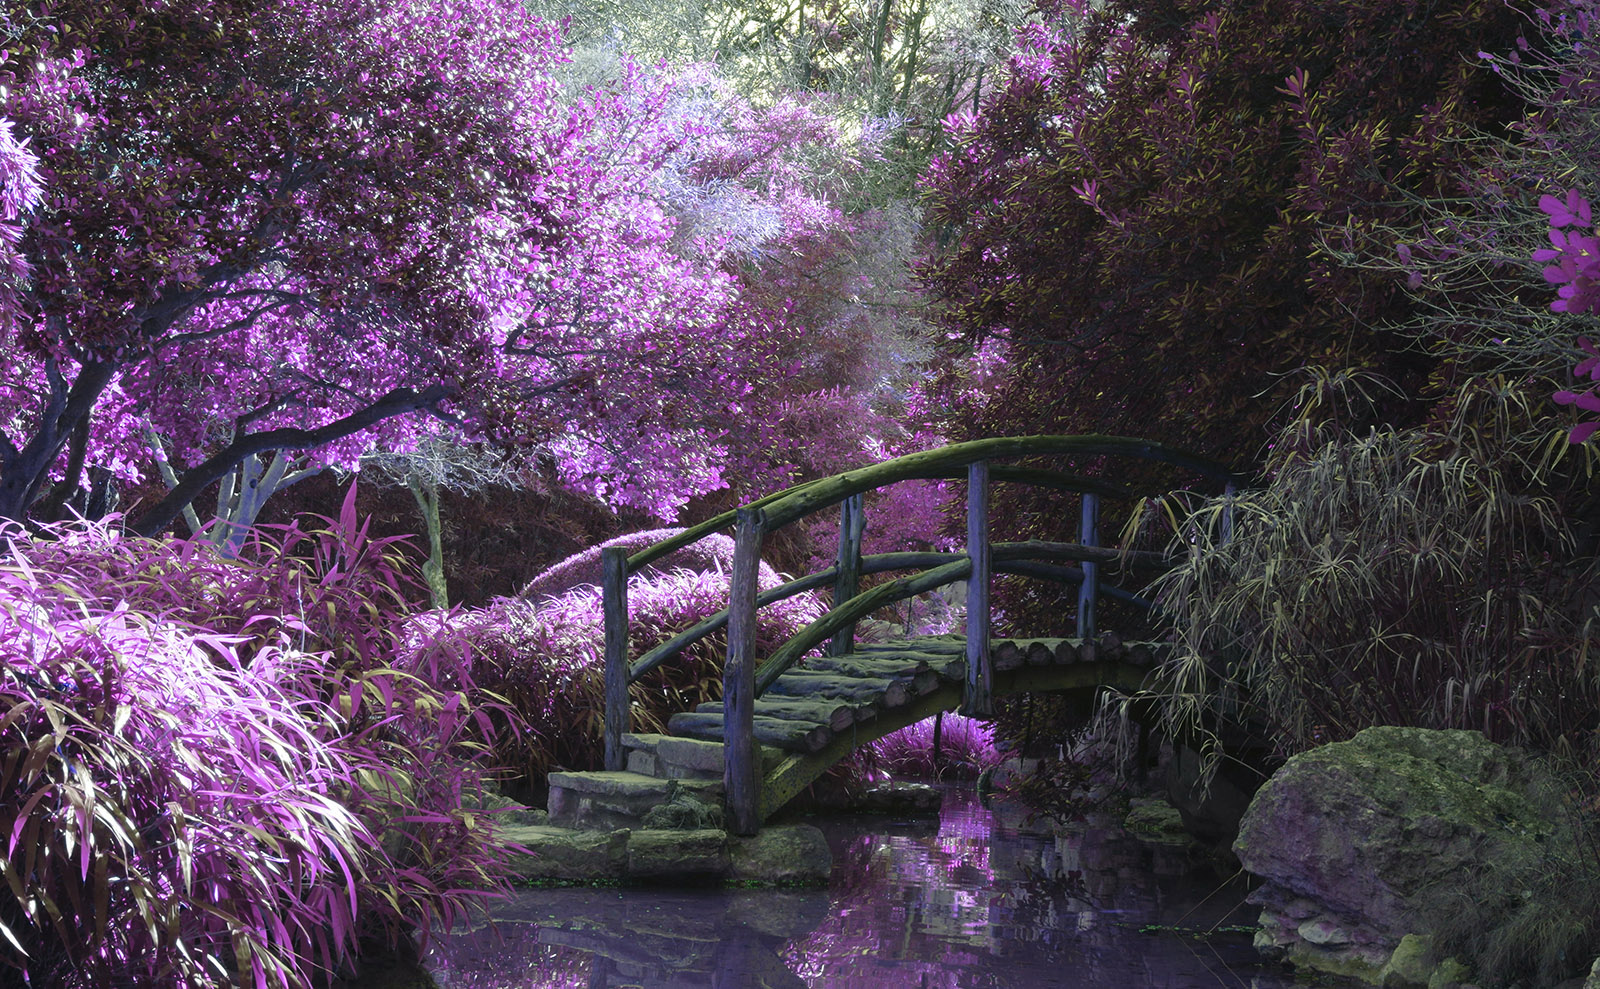 Let's Take a Virtual Walk in Colorful Garden Displays Around the World